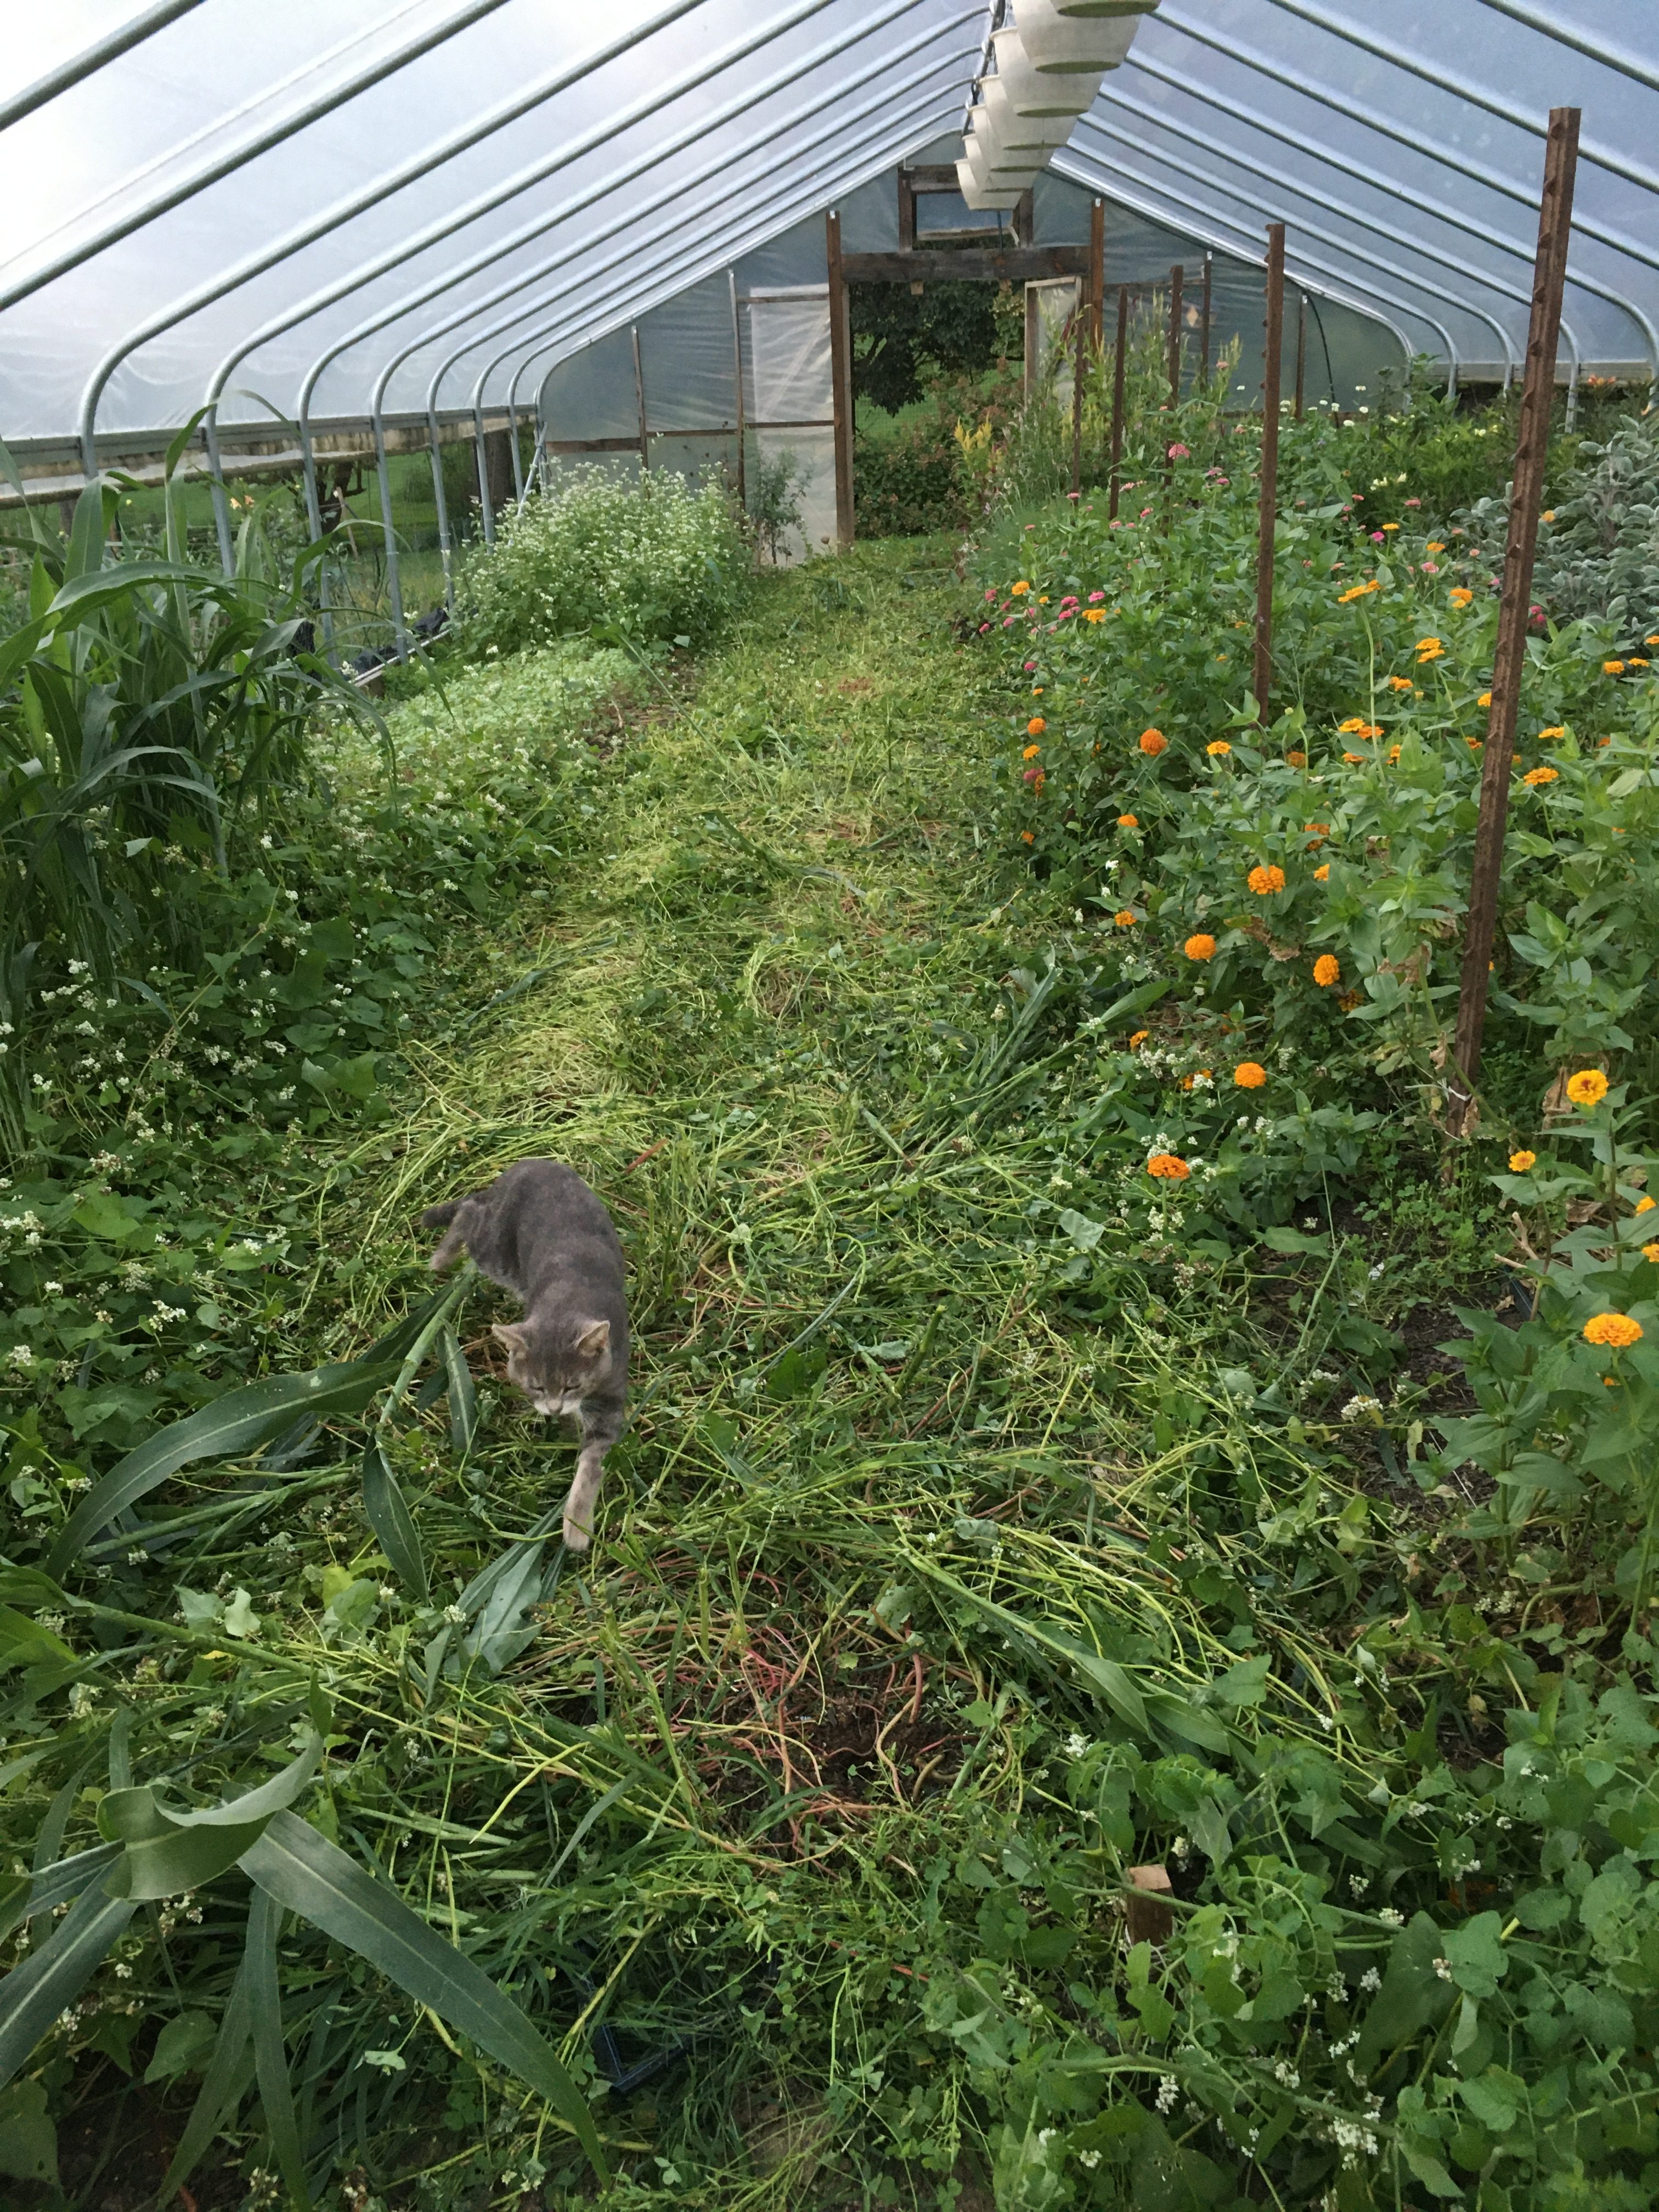 Cover Crops for Flower Farming | Summer Green Manure growing in flower farm hoop house | Photo by Love 'n Fresh Flowers